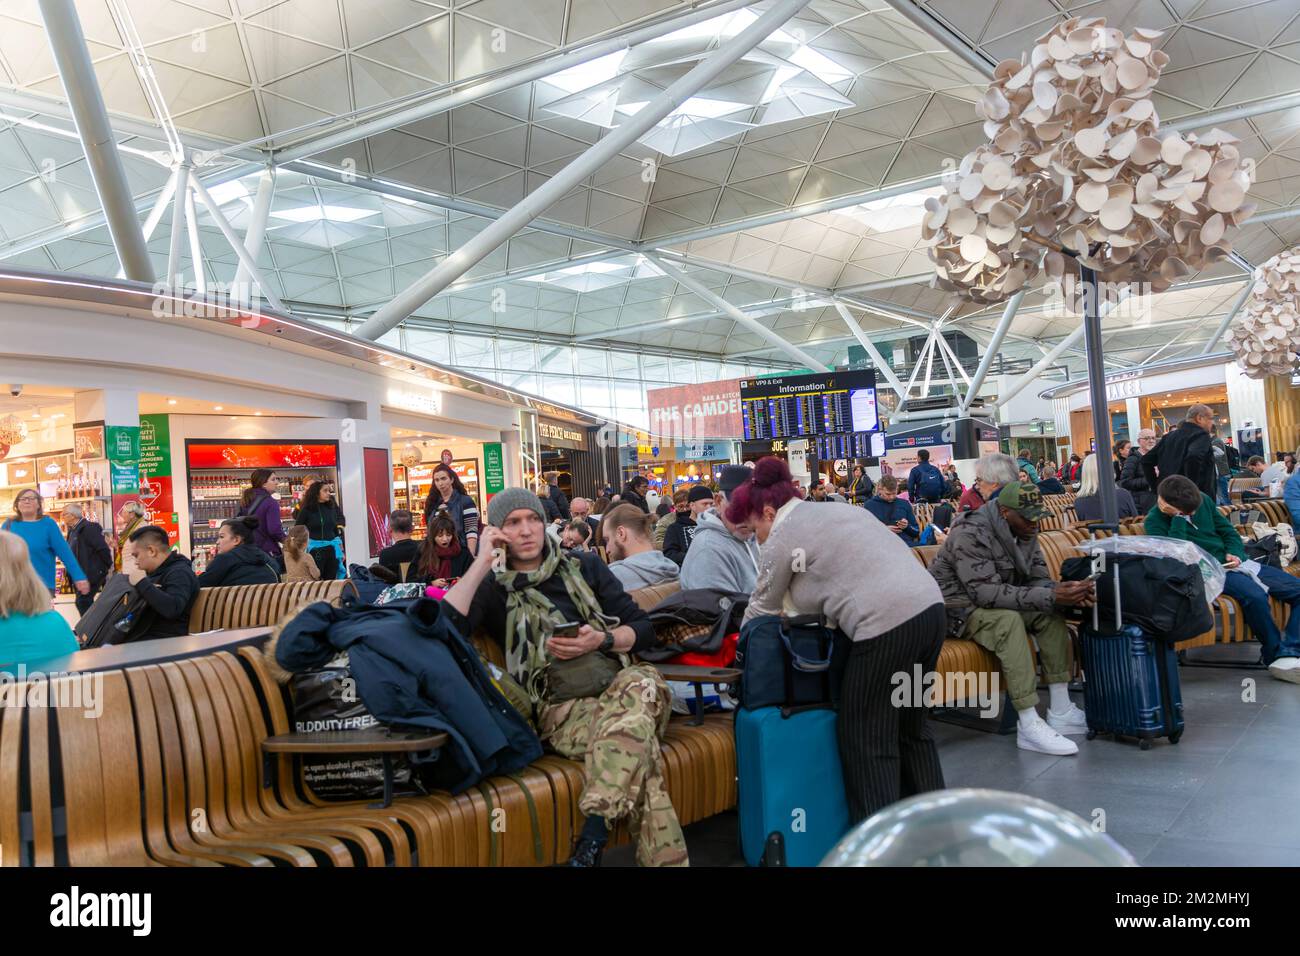 Passengers in departure lounge waiting area, Stansted airport, Essex, England, UK Stock Photo